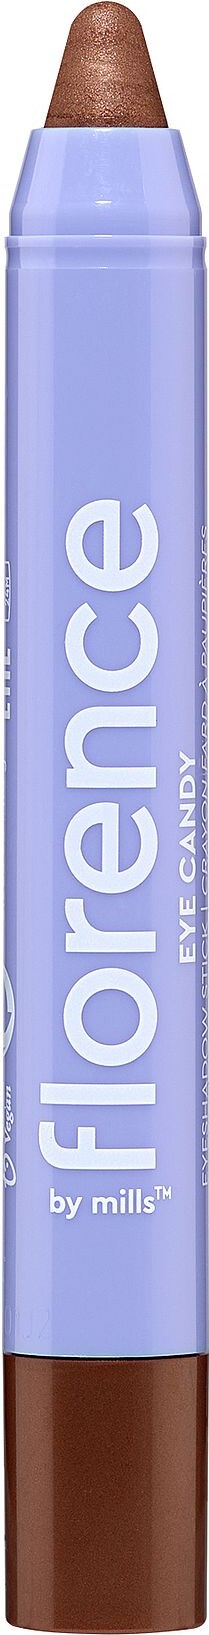 Se Florence By Mills - Eye Candy Eyeshadow Stick - Toffee hos Gucca.dk